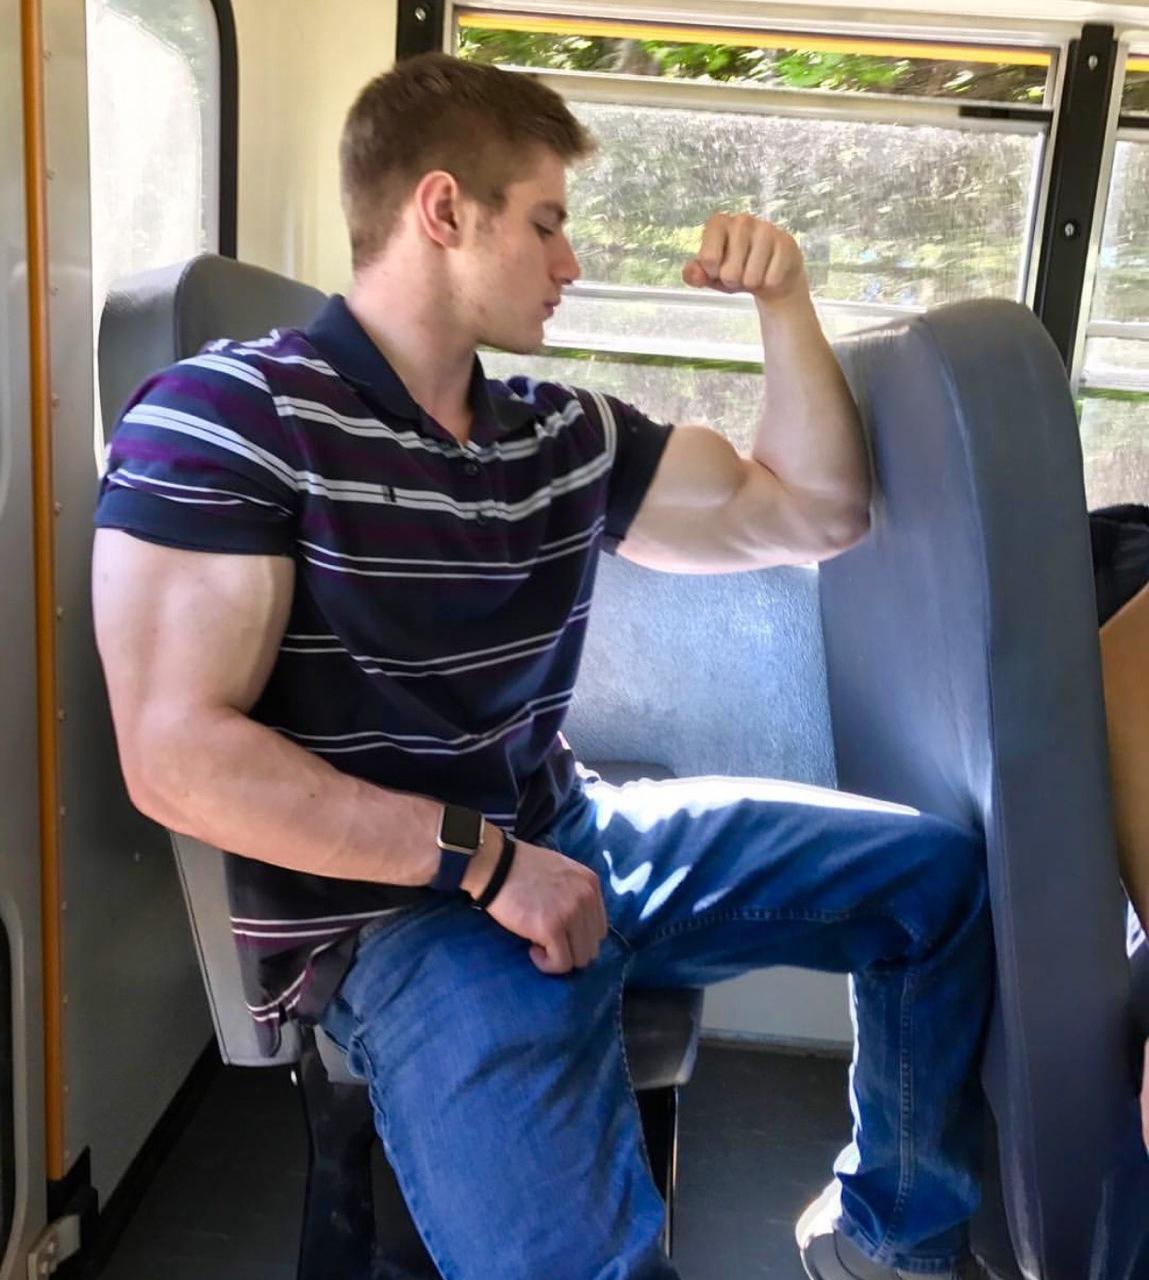 Hung muscleboy goes over mans